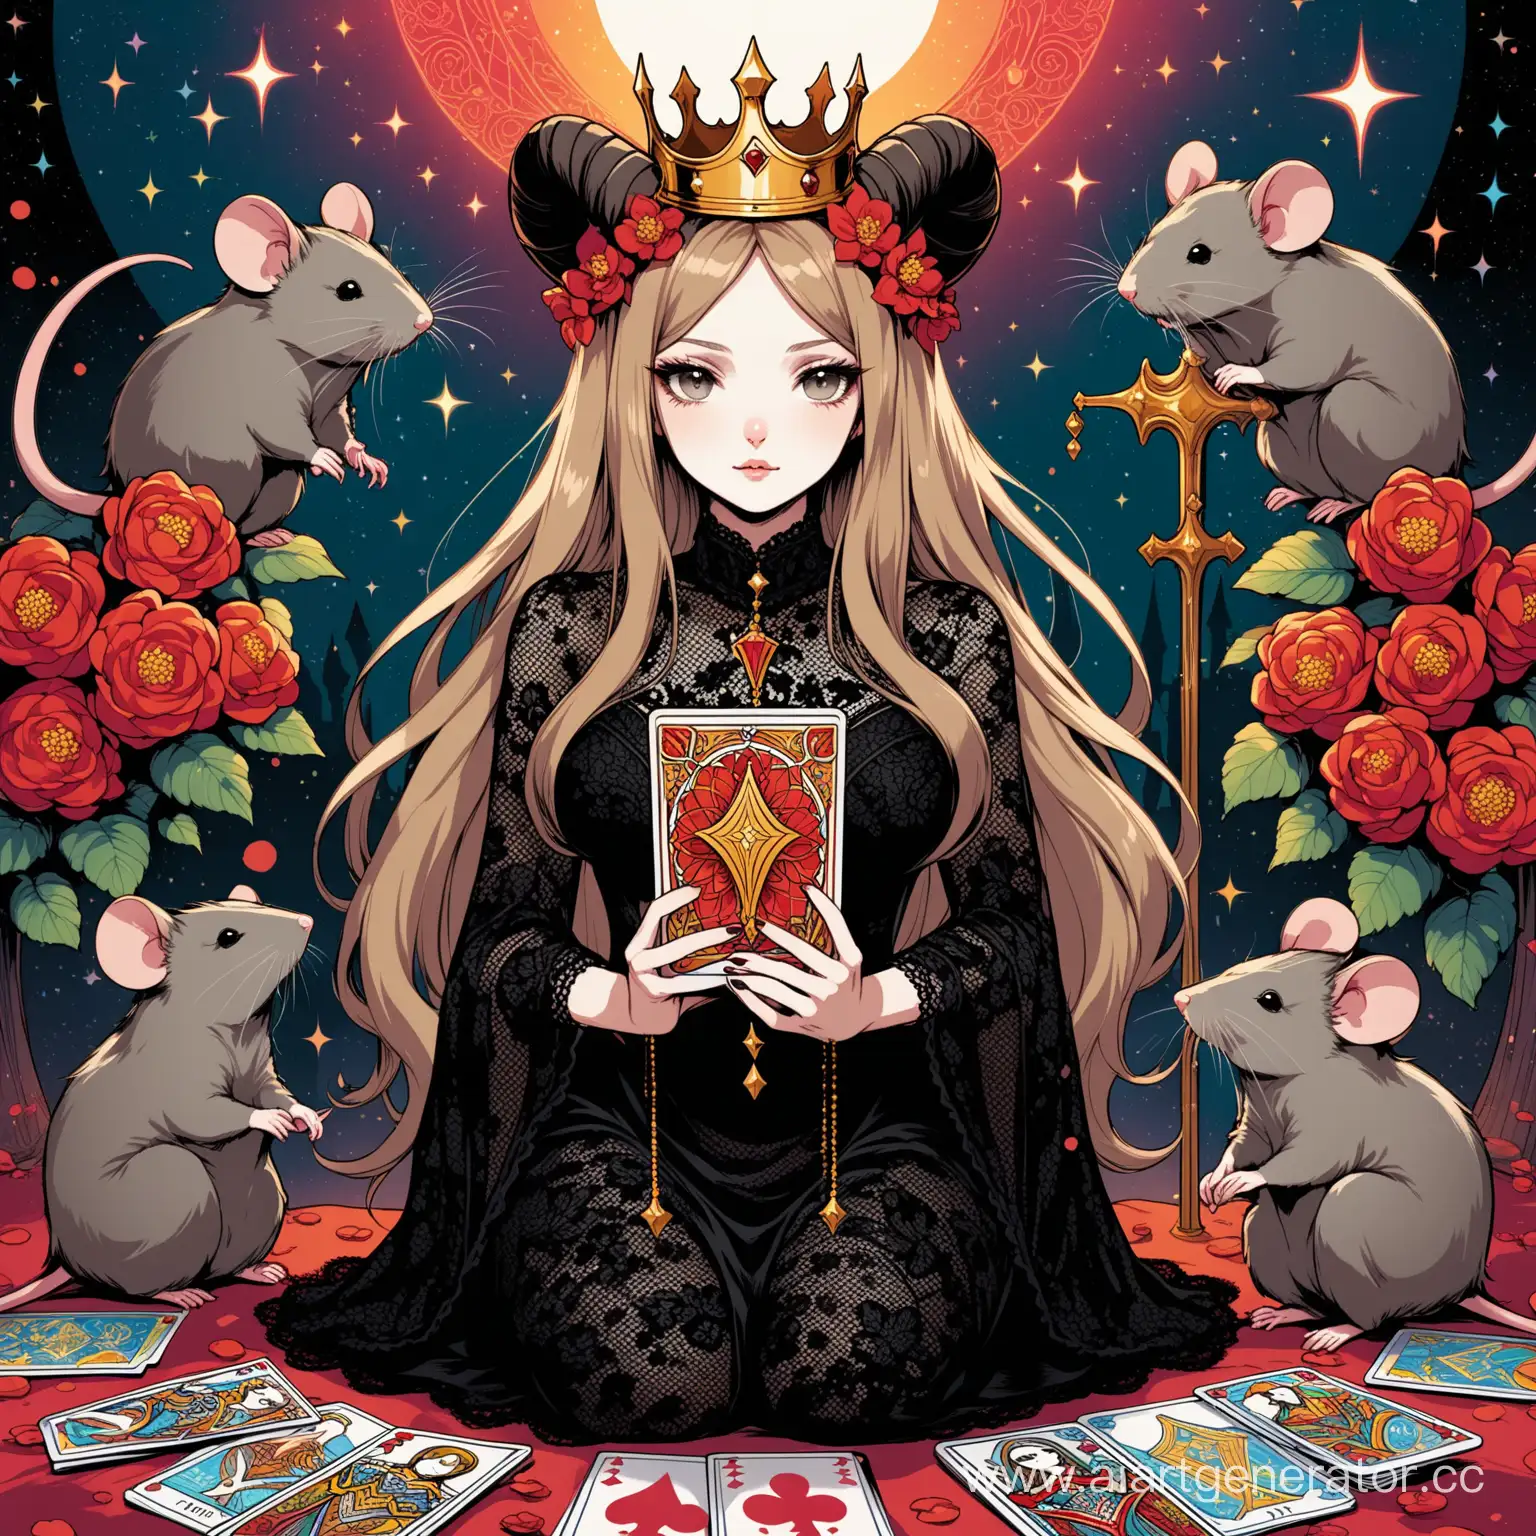 Psychedelic-Girl-with-Horned-Crown-Holding-Tarot-Card-Surrounded-by-Rats